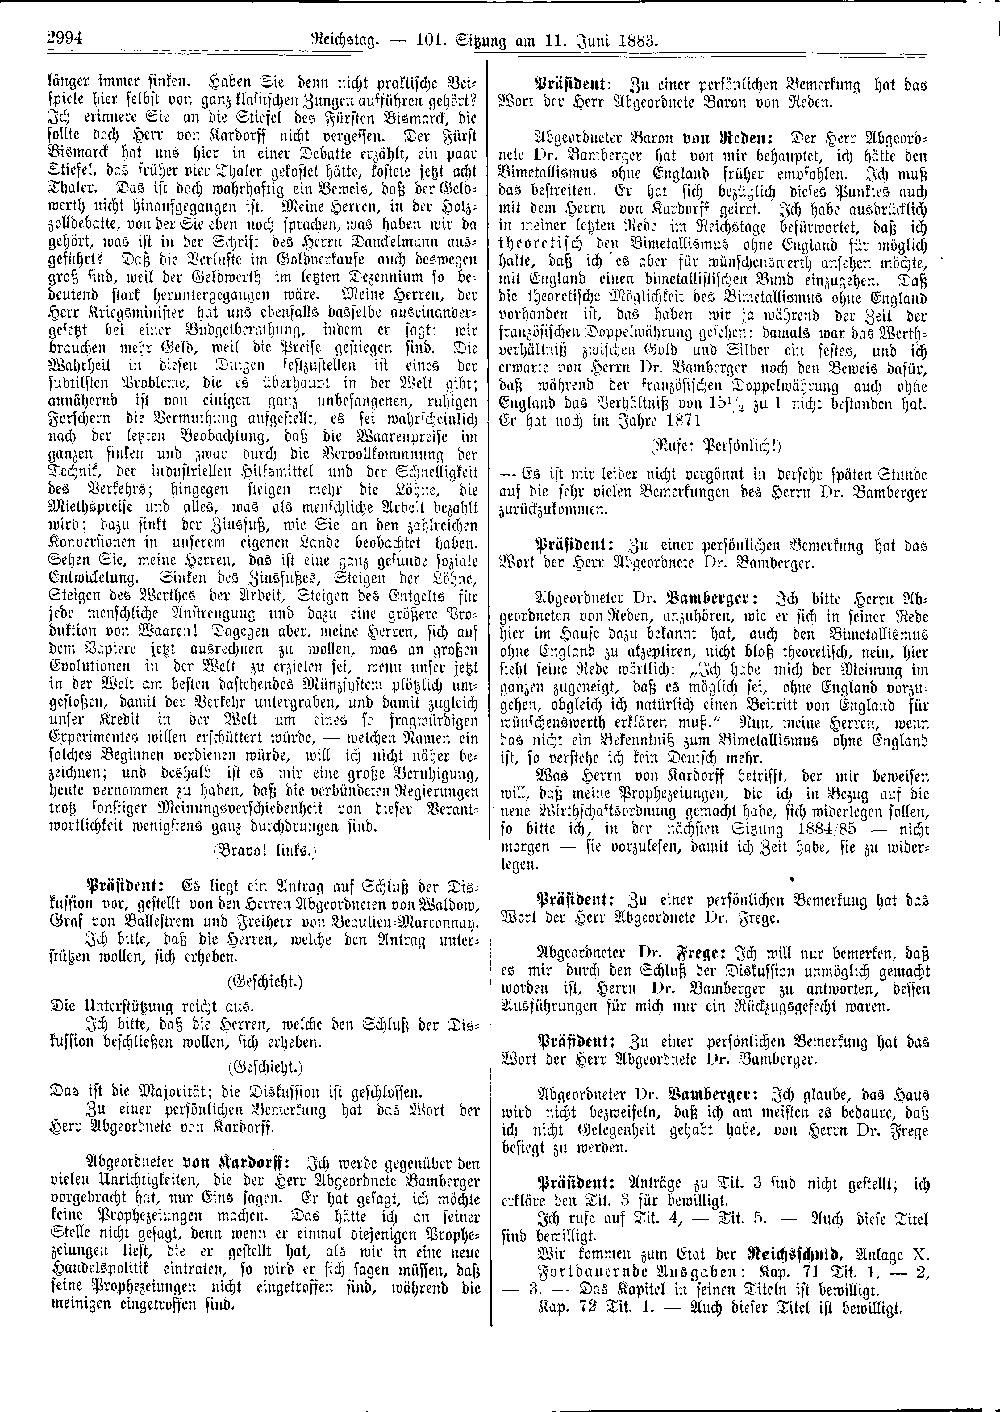 Scan of page 2994